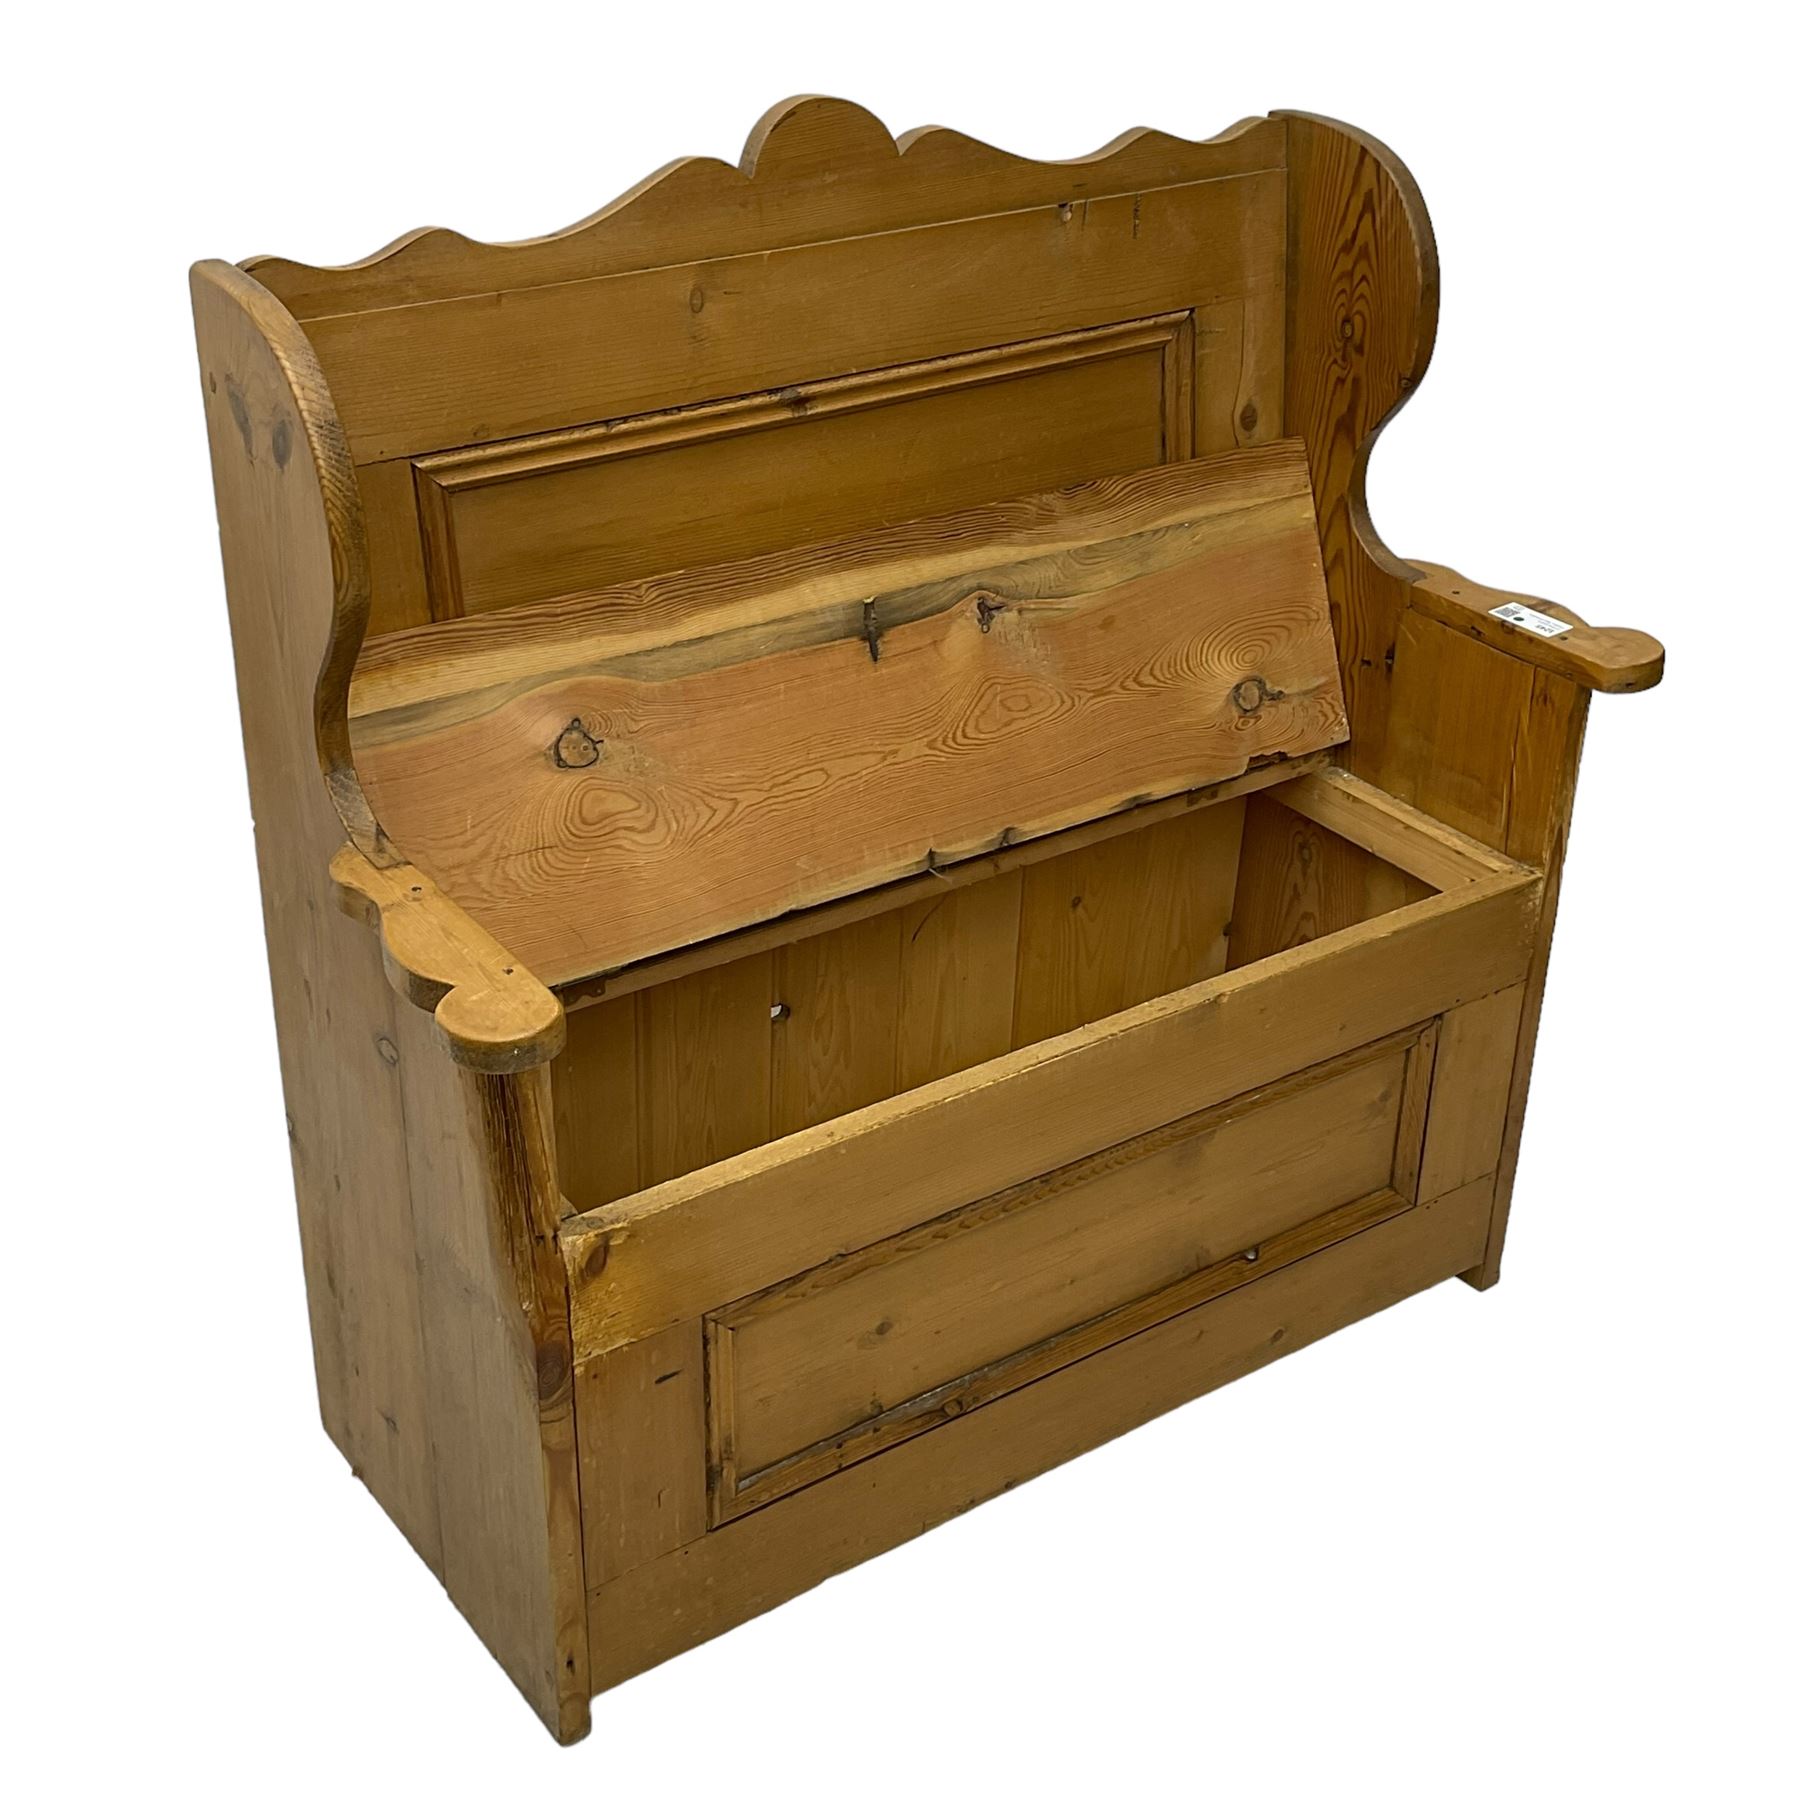 Waxed pine box-seat settle or hall bench - Image 2 of 5